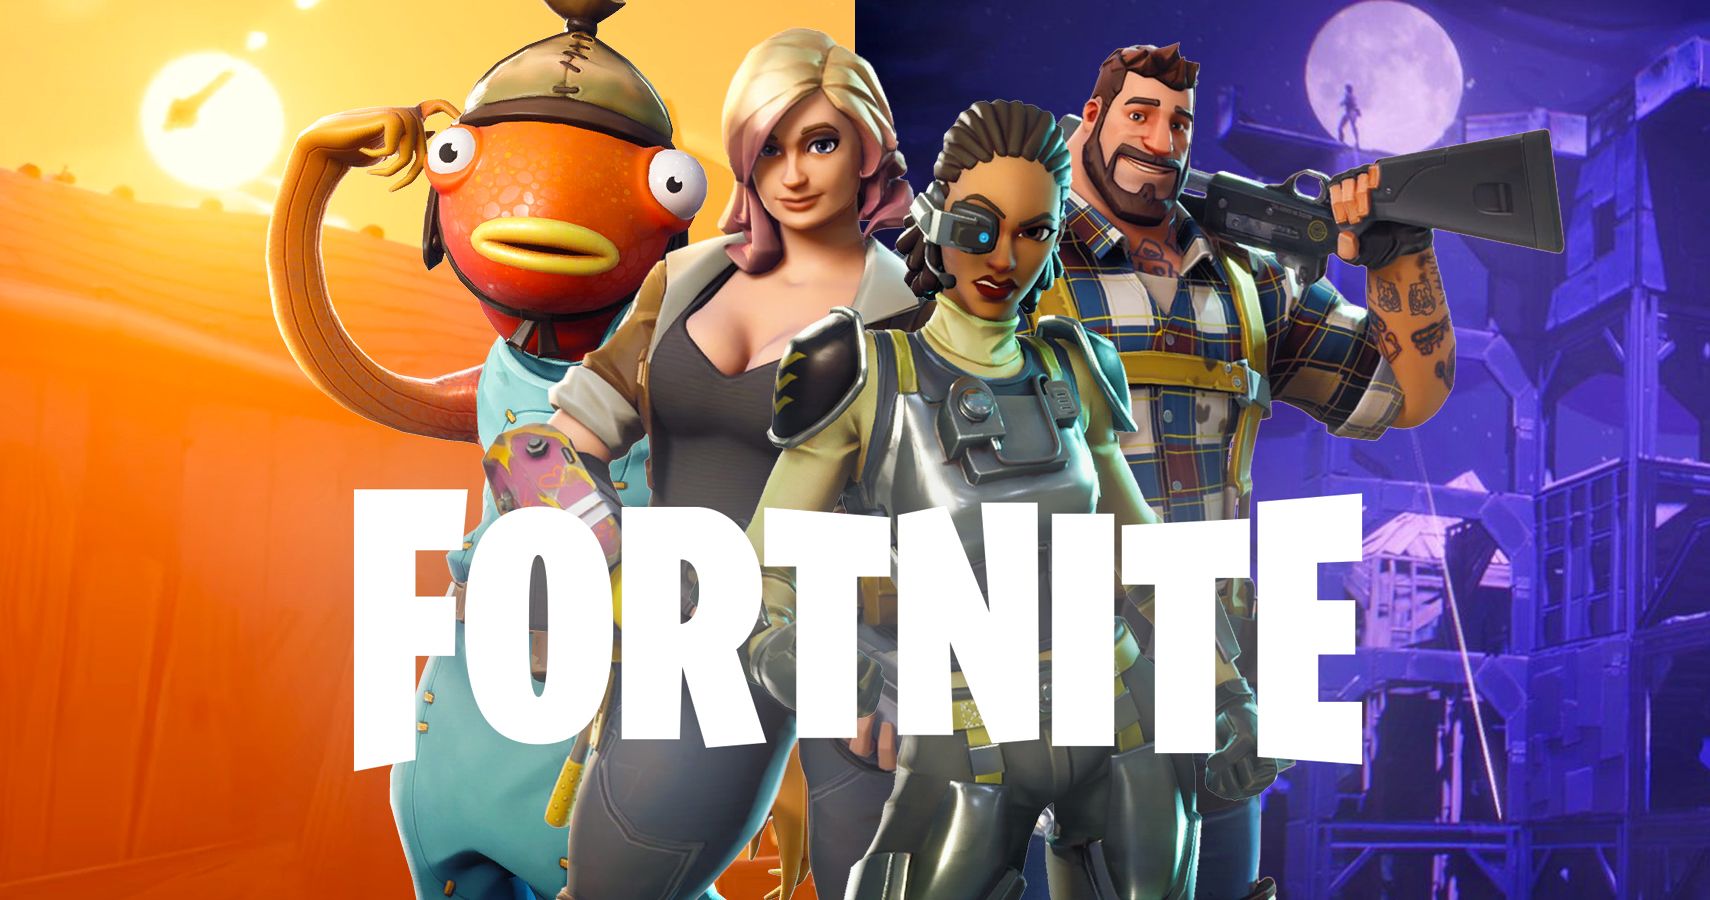 How Long Is A Fortnight